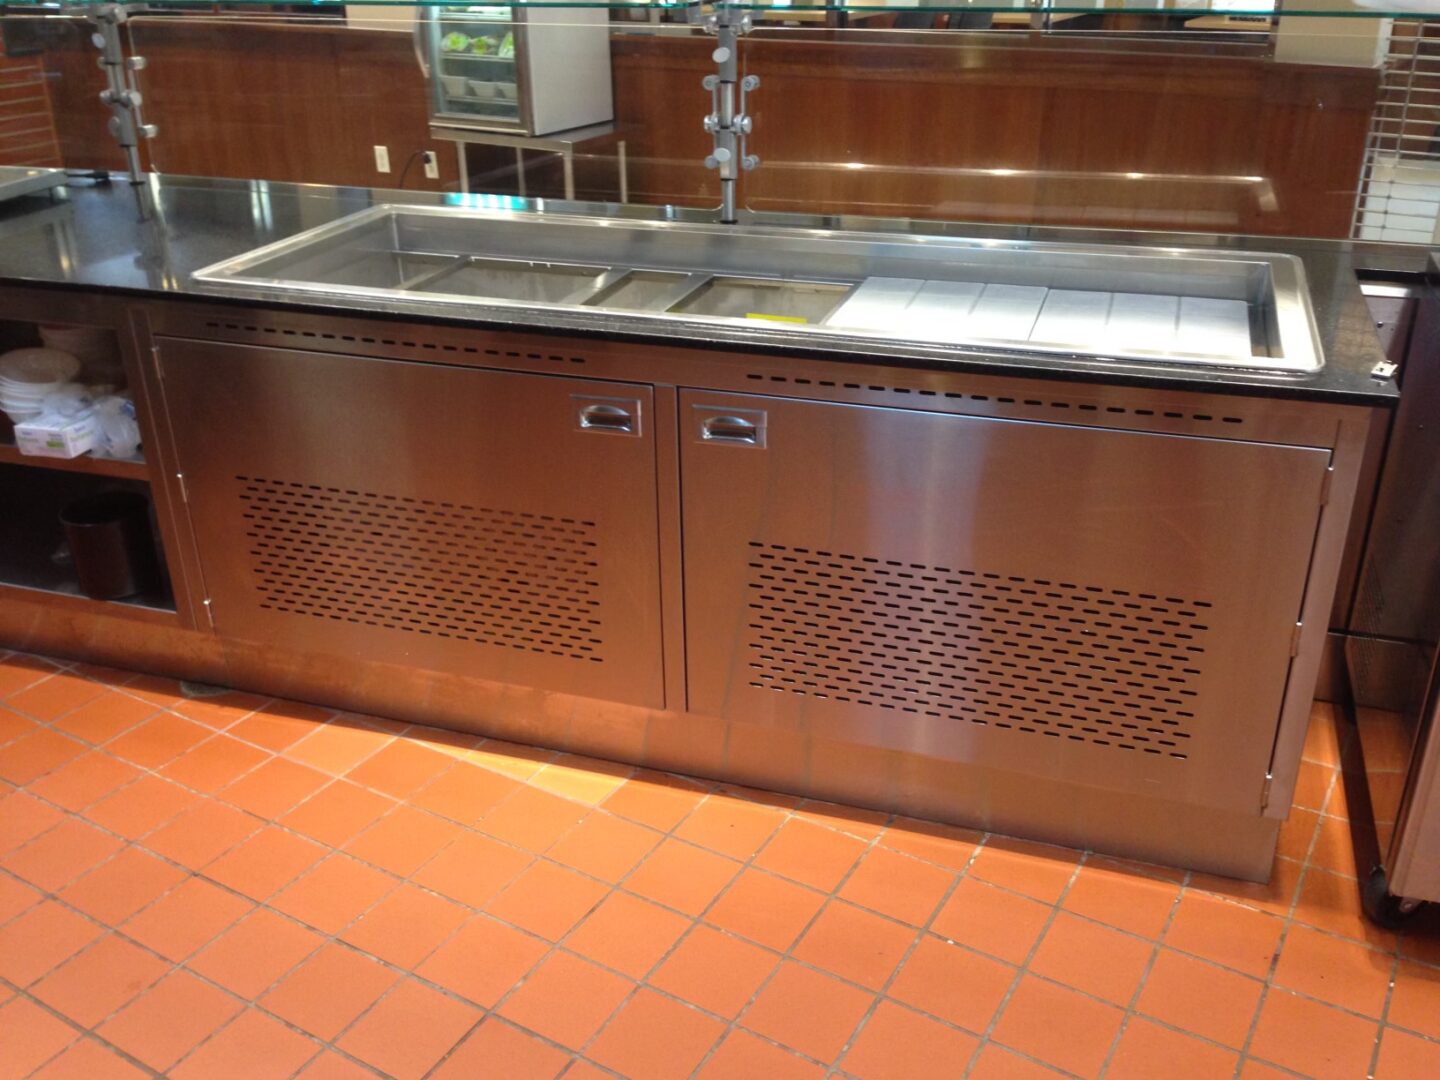 View of the kitchen platform with steel sink area